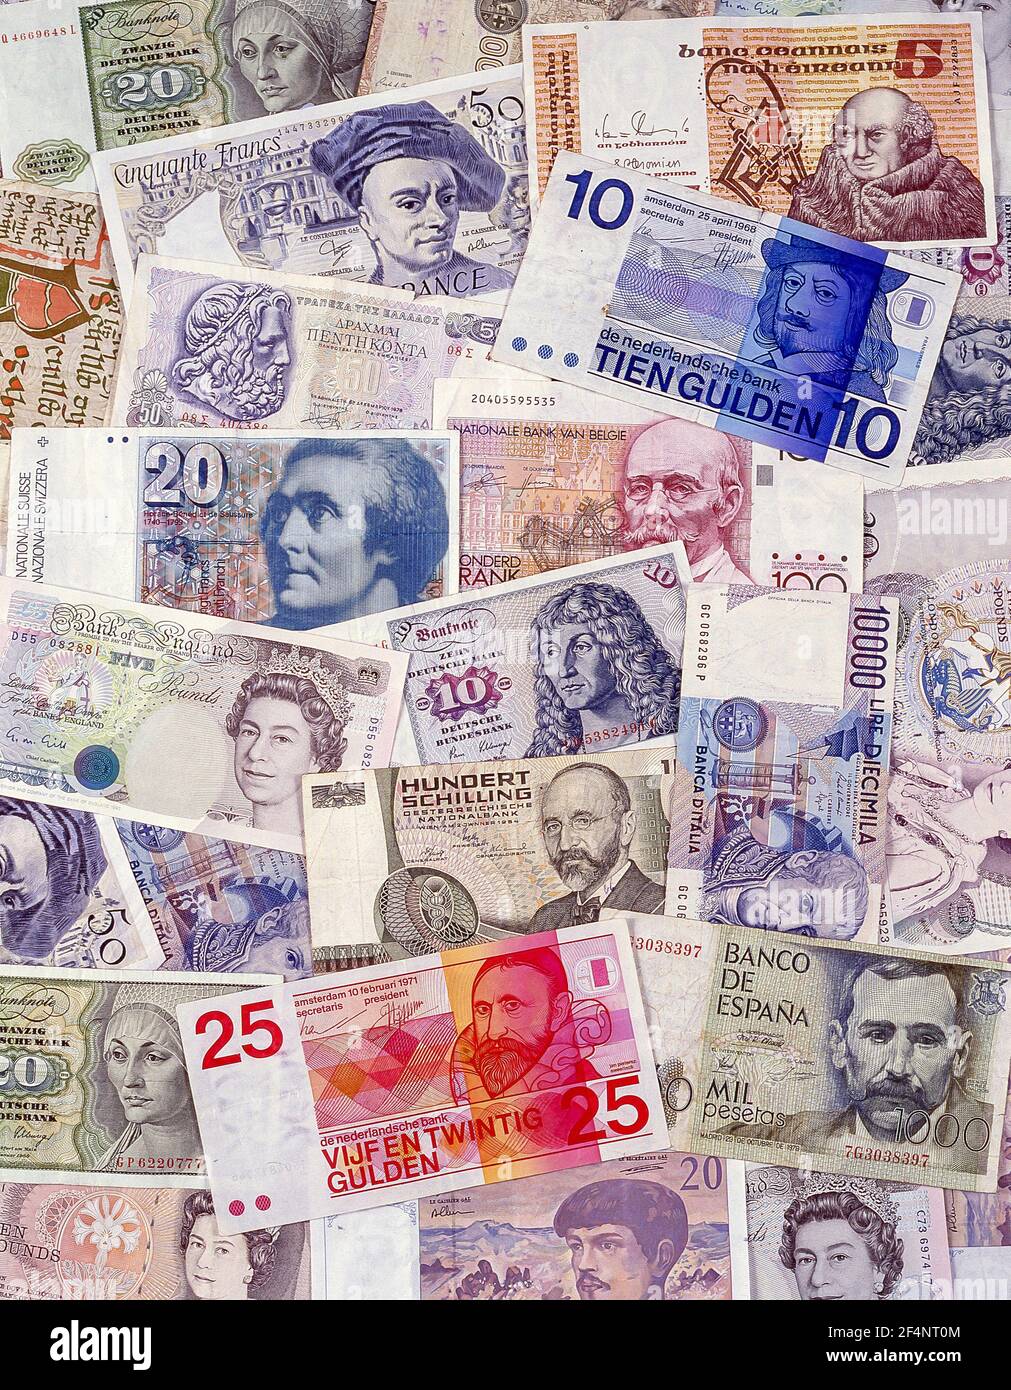 Selection of former European currency notes, Greater London, England, United Kingdom Stock Photo